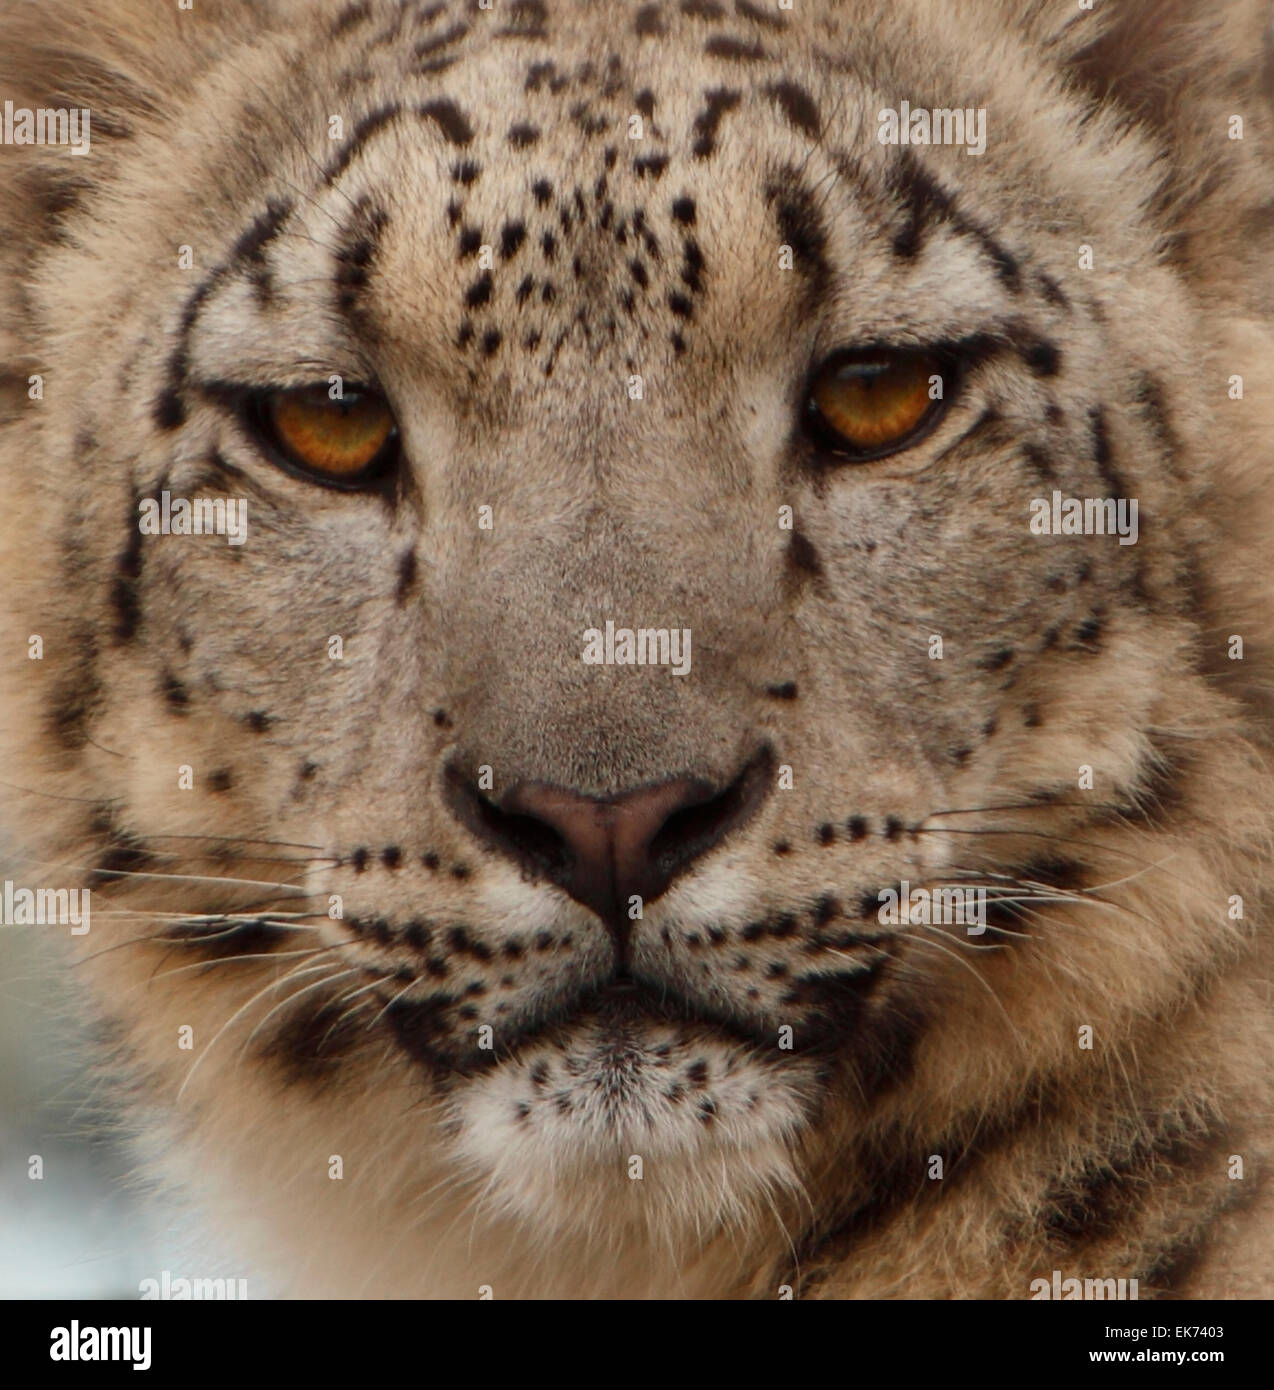 Uncia uncia. Snow Leopard. Big cat found in the mountains. Stock Photo